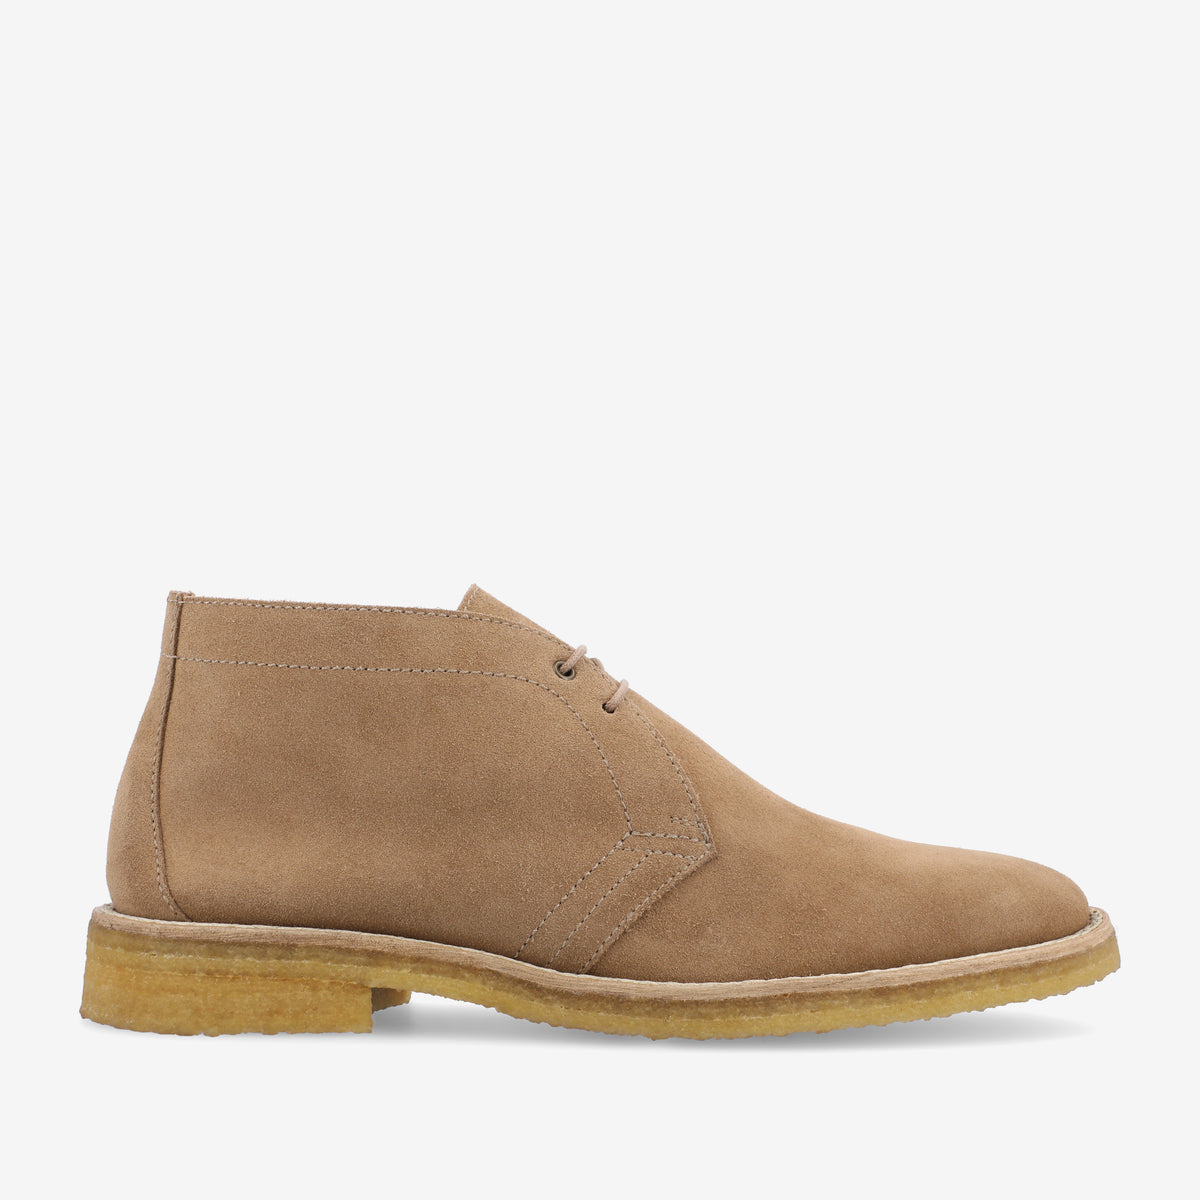 The Chukka Boot in Beige (Last Chance, Final Sale)